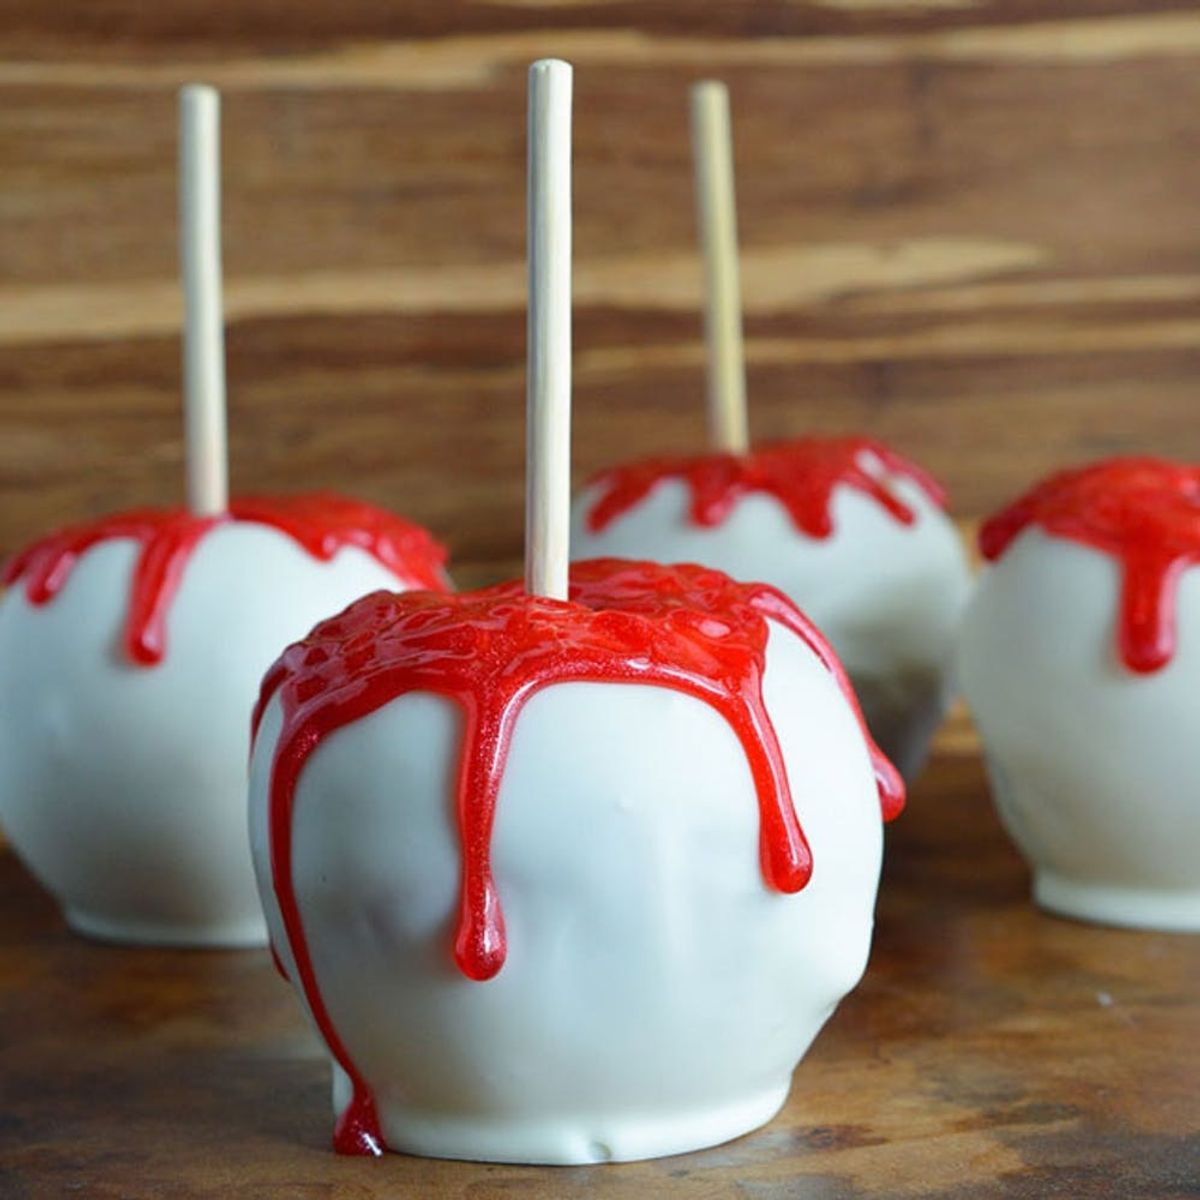 11 Caramel Apple Recipes for a Scary and Sweet Treat